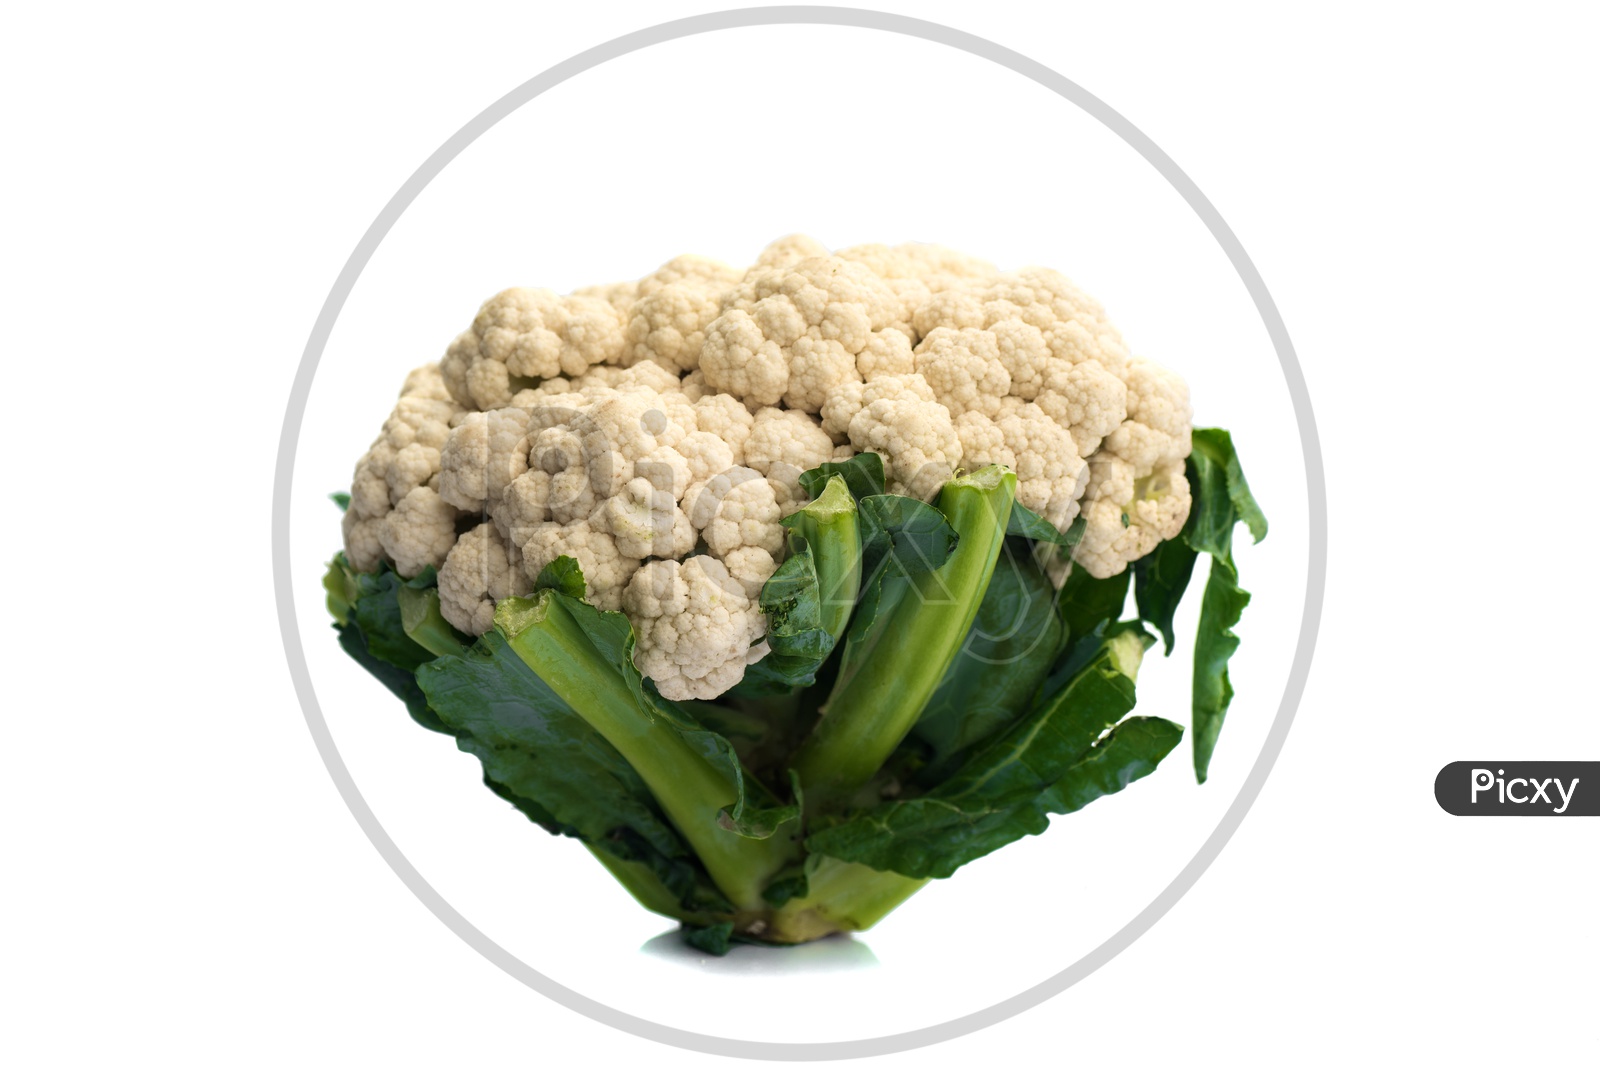 Cauliflower Vegetable Isolated On an White Background